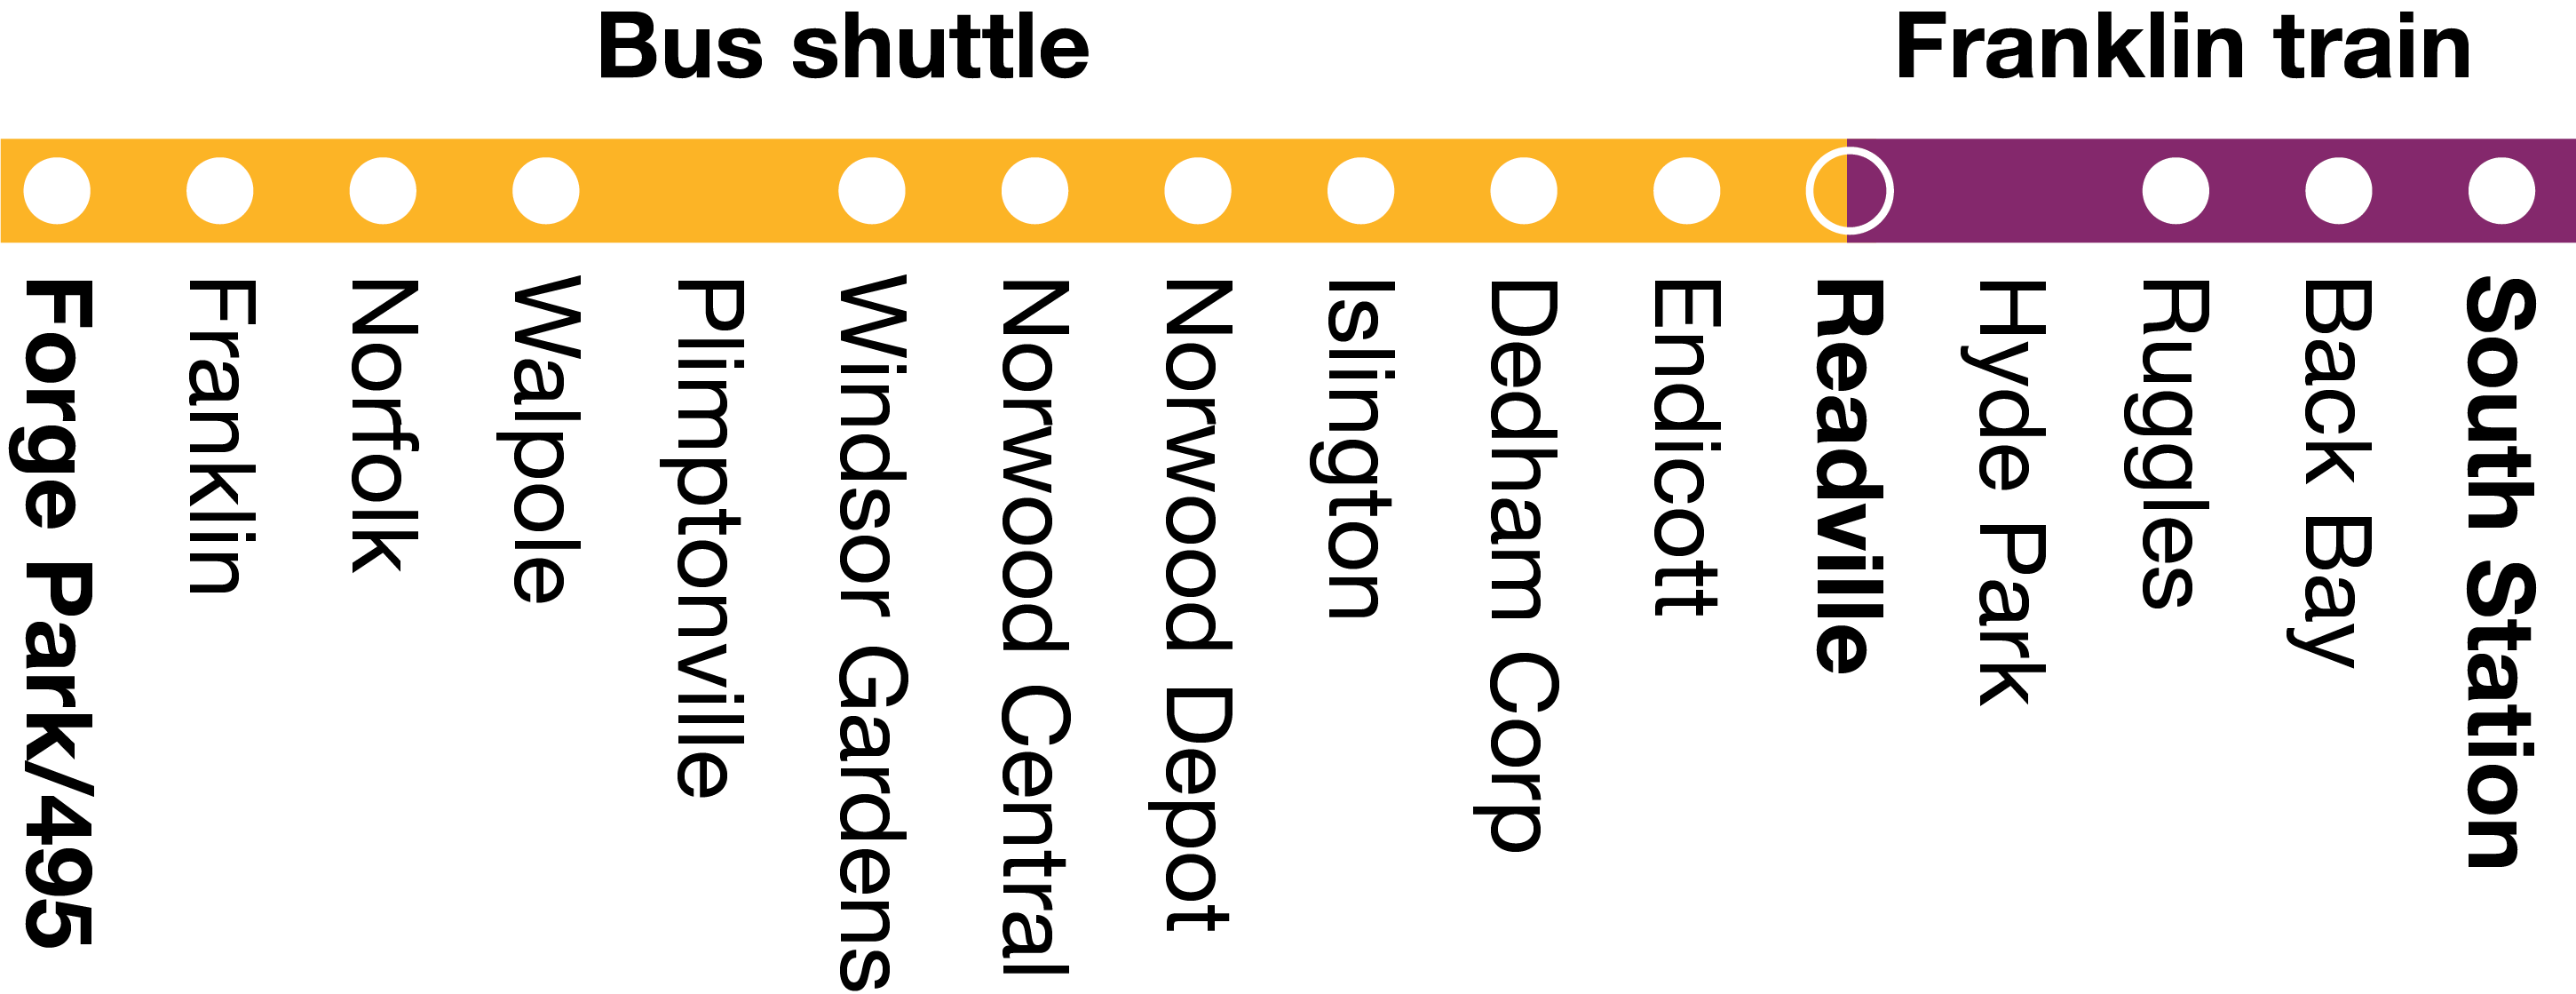 Graphic showing shuttles from Forge Park to Readville, and train service from Readville to South Station.